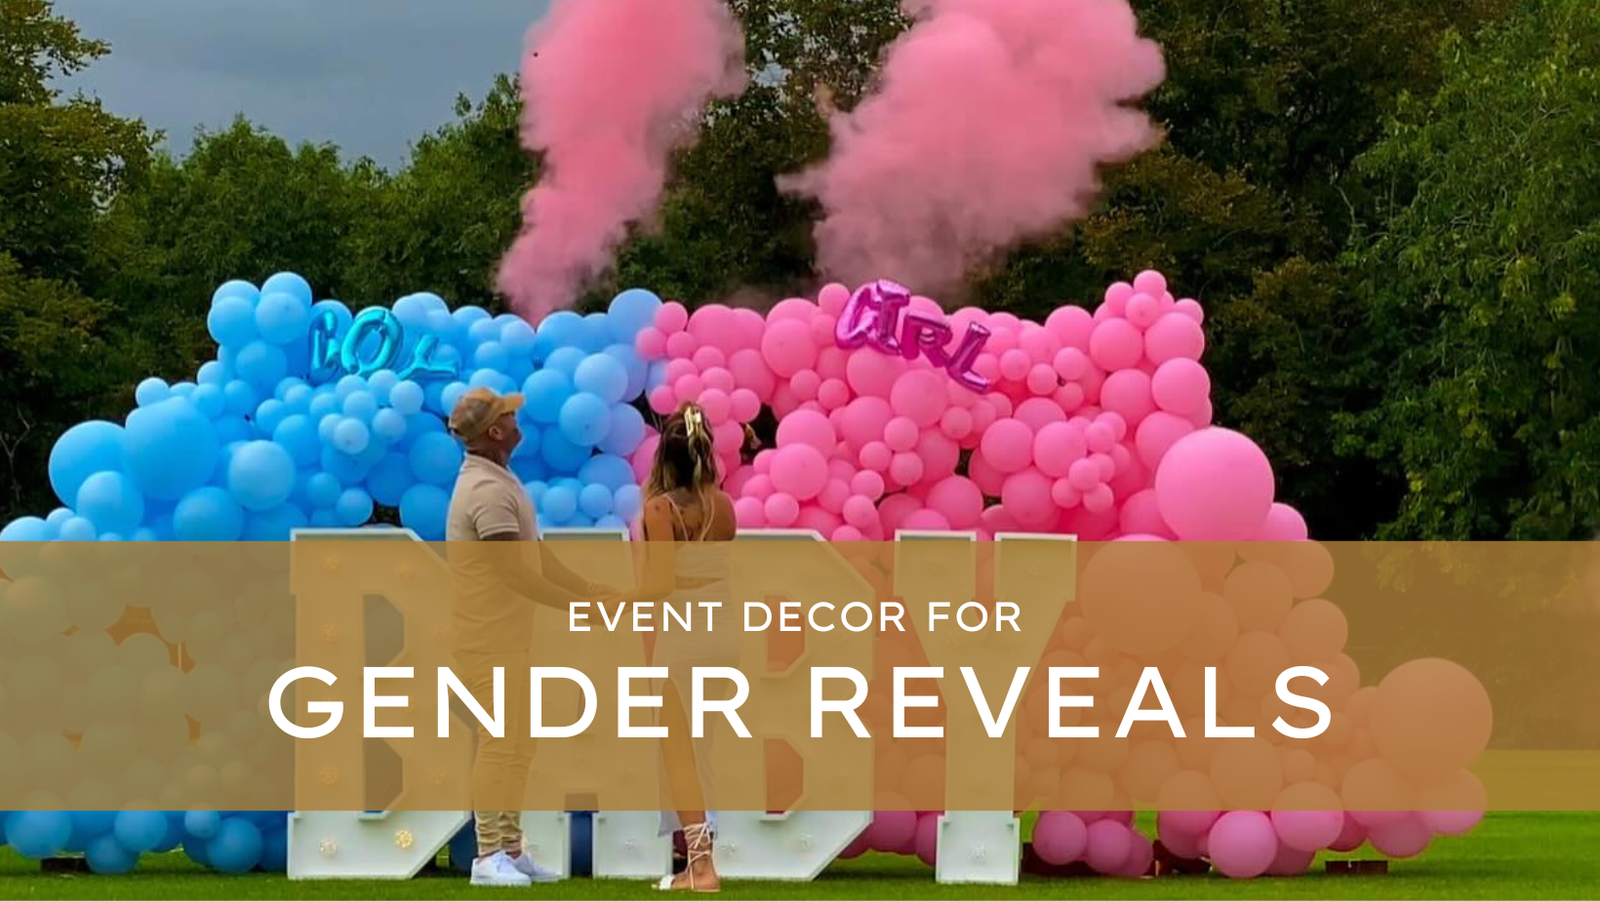 Get ready to reveal the exciting secret in the picturesque locales of Abington, Boothville, Boughton, and more! Whether you're nestled in the charming town of Brixworth or enjoying the scenic beauty of Cotton End, Events Right is your go-to for an unforgettable gender reveal. Share the magical moment in the heart of Daventry or amidst the greenery of Duston. From the historic charm of Earls Barton to the vibrant vibes of Far Cotton, our gender reveal options are tailored to your unique style. Explore the possibilities in Kettering, Kingsthorpe, Moulton, and beyond. Contact us to plan a gender reveal that will be the talk of towns like Nether Heyford, Olney, and Roade, making memories in Pitsford, Rushden, and Semilong. Discover the joy in Sywell, Thrapston, Towcester, and Wellingborough, and celebrate the big reveal in the lovely settings of West Hunsbury, Wollaston, and Wootton!